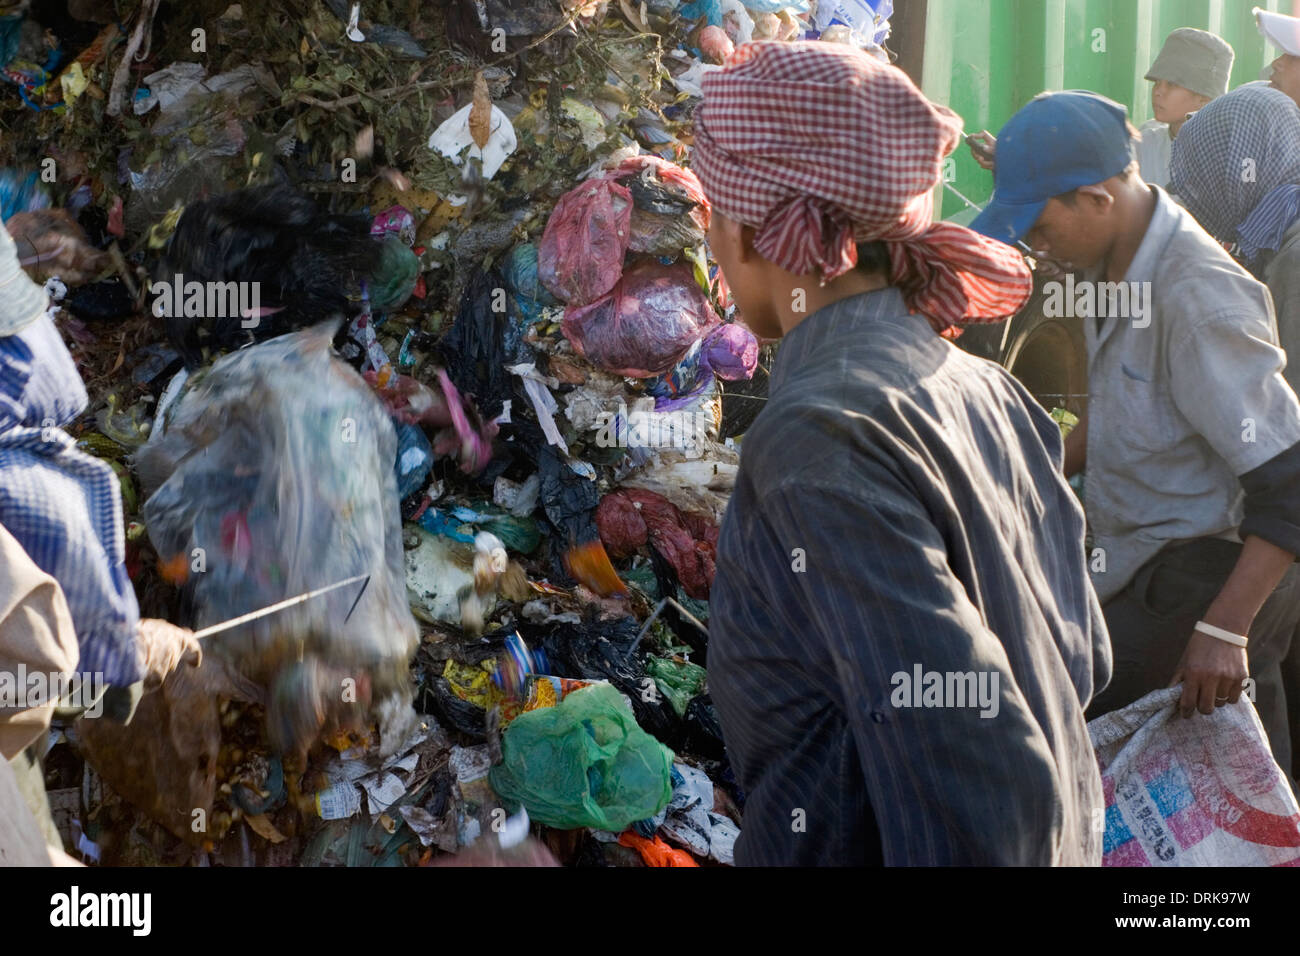 A group of scavengers are collecting recyclable material at the toxic Stung Meanchey Landfill in Phnom Penh, Cambodia. Stock Photo